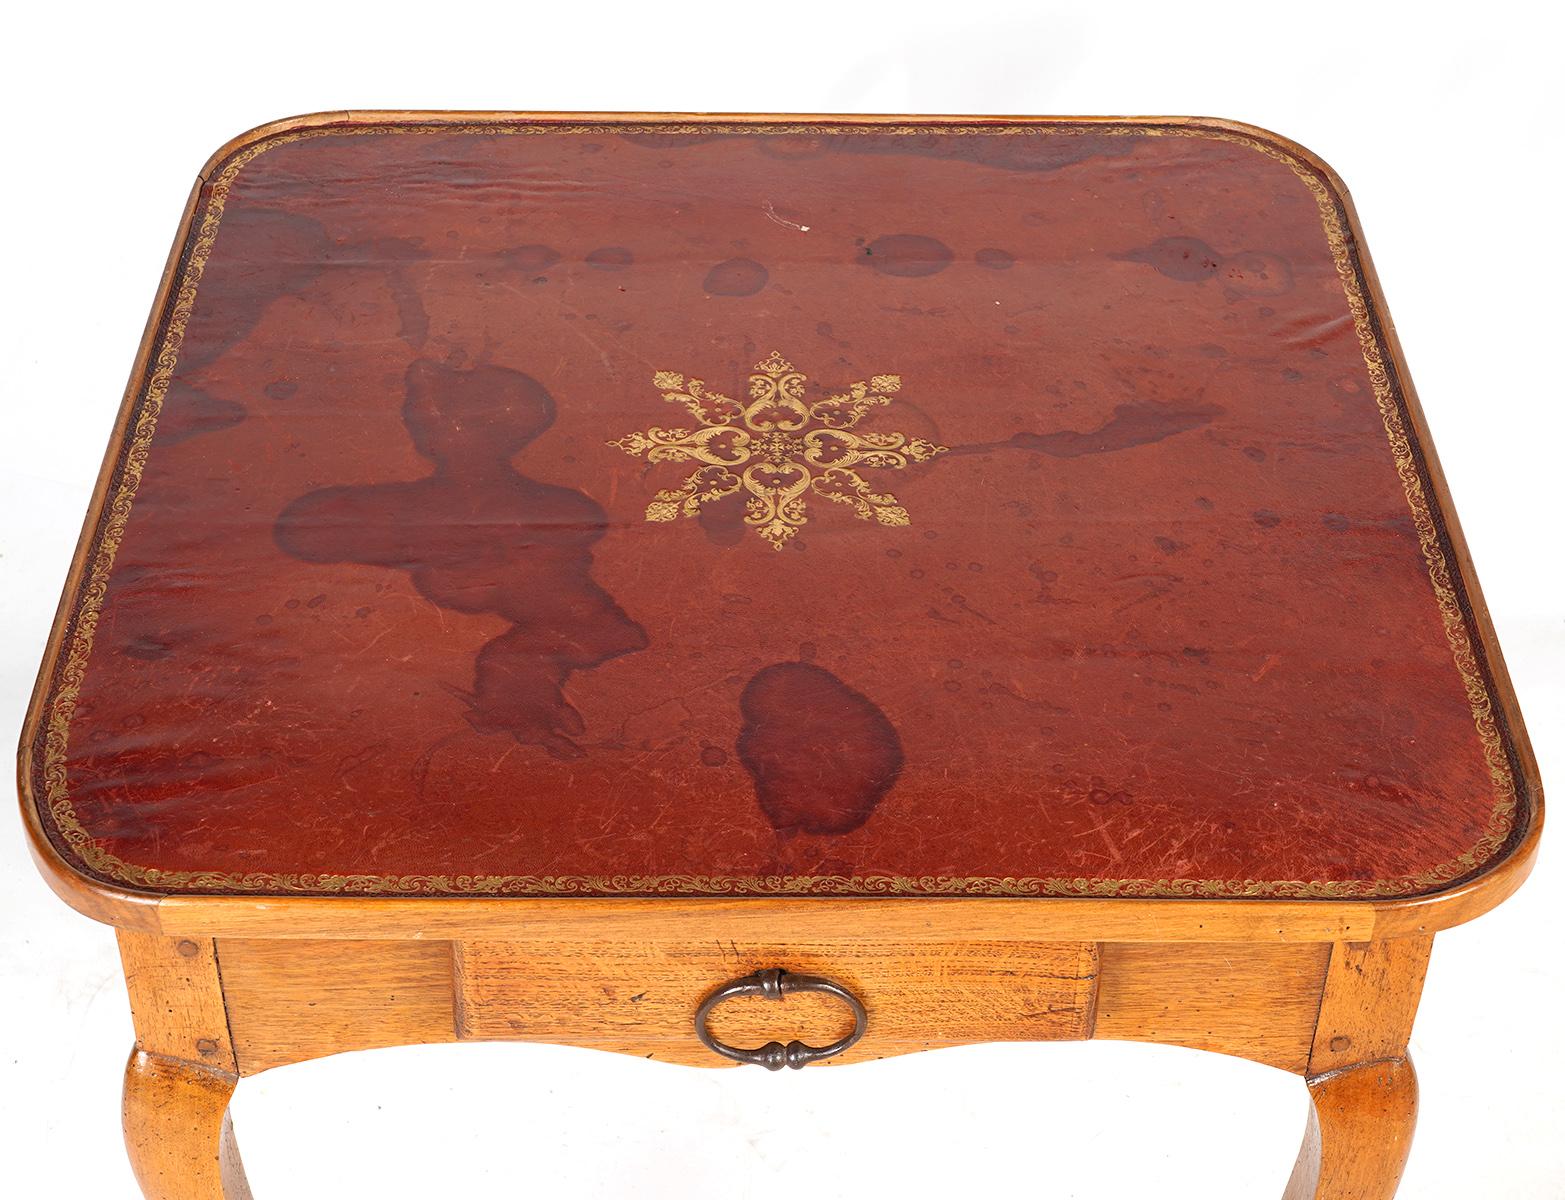 This Italian late 18th century table features a leather gilt tooled tray style top centering an elaborate star motif above a shaped frieze with one drawer raised on slender cabriole legs ending in stylized hoof feet.